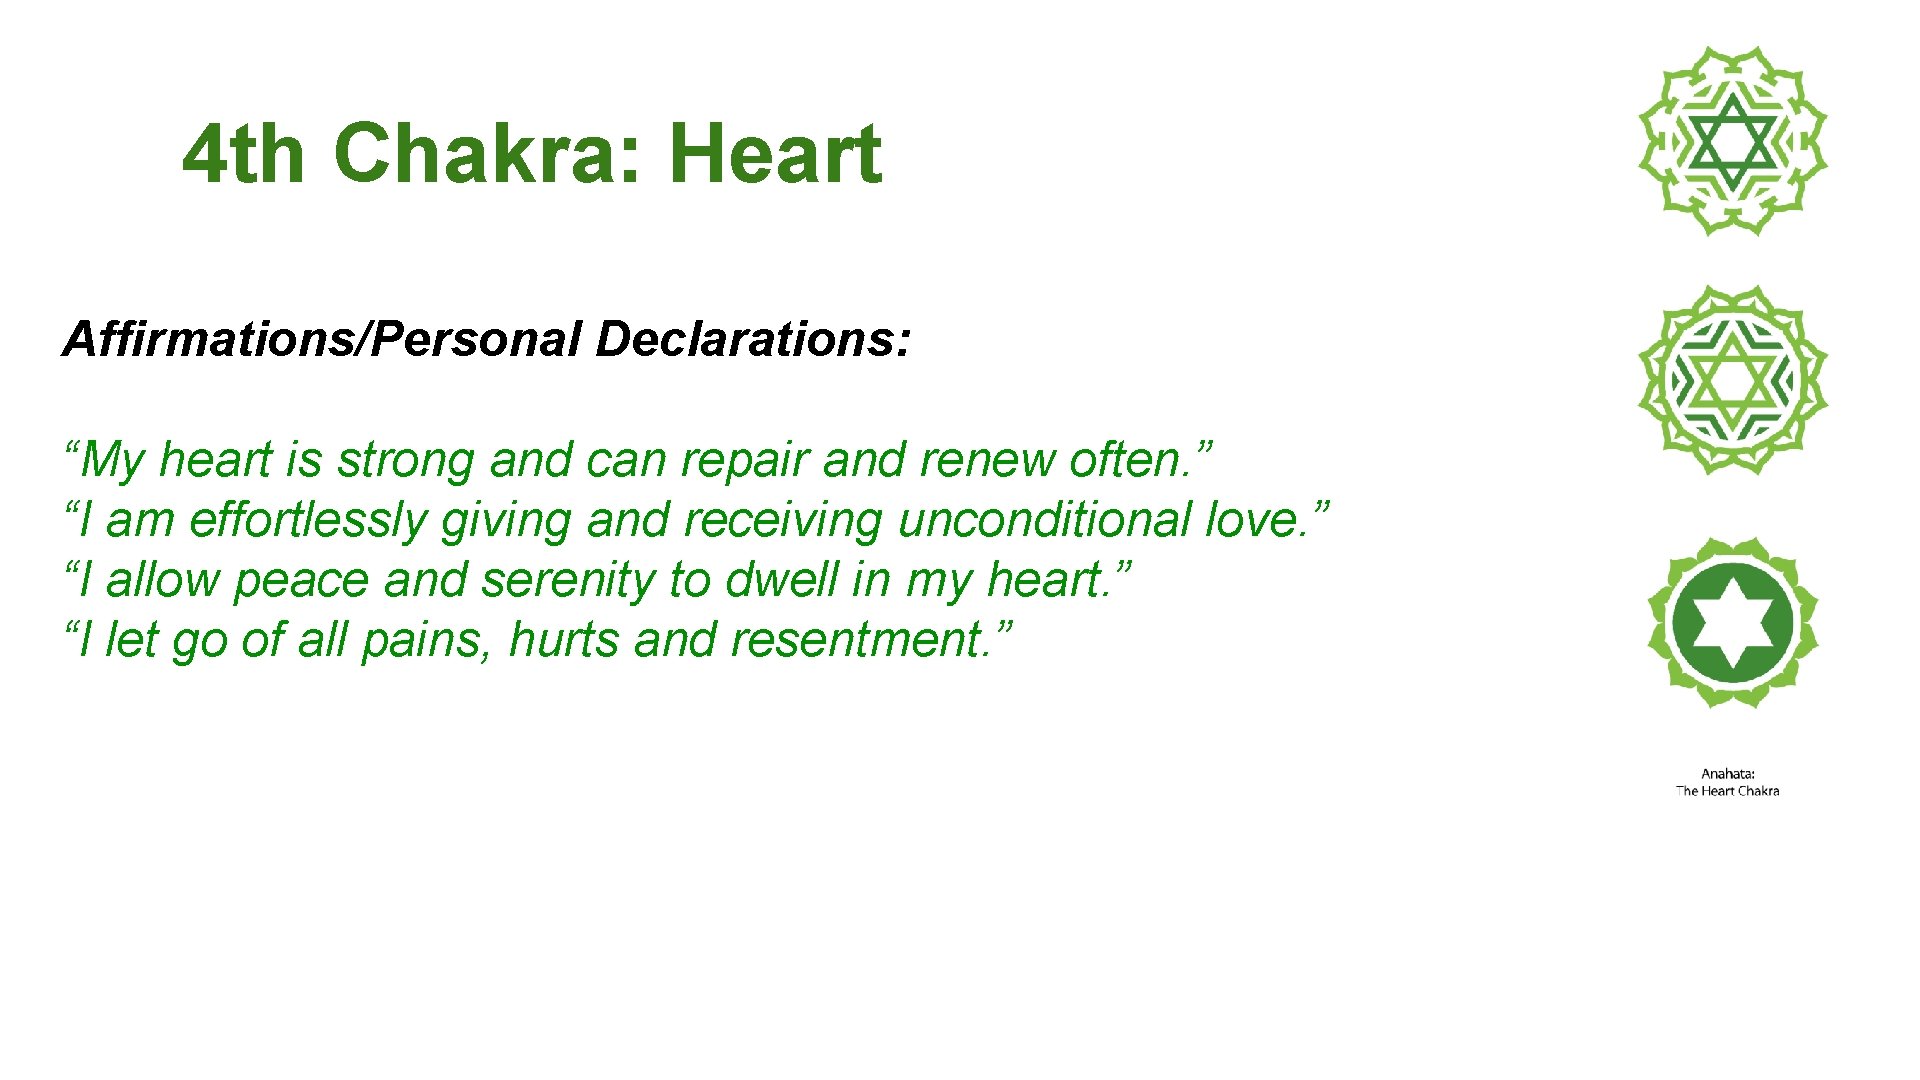 4 th Chakra: Heart Affirmations/Personal Declarations: “My heart is strong and can repair and